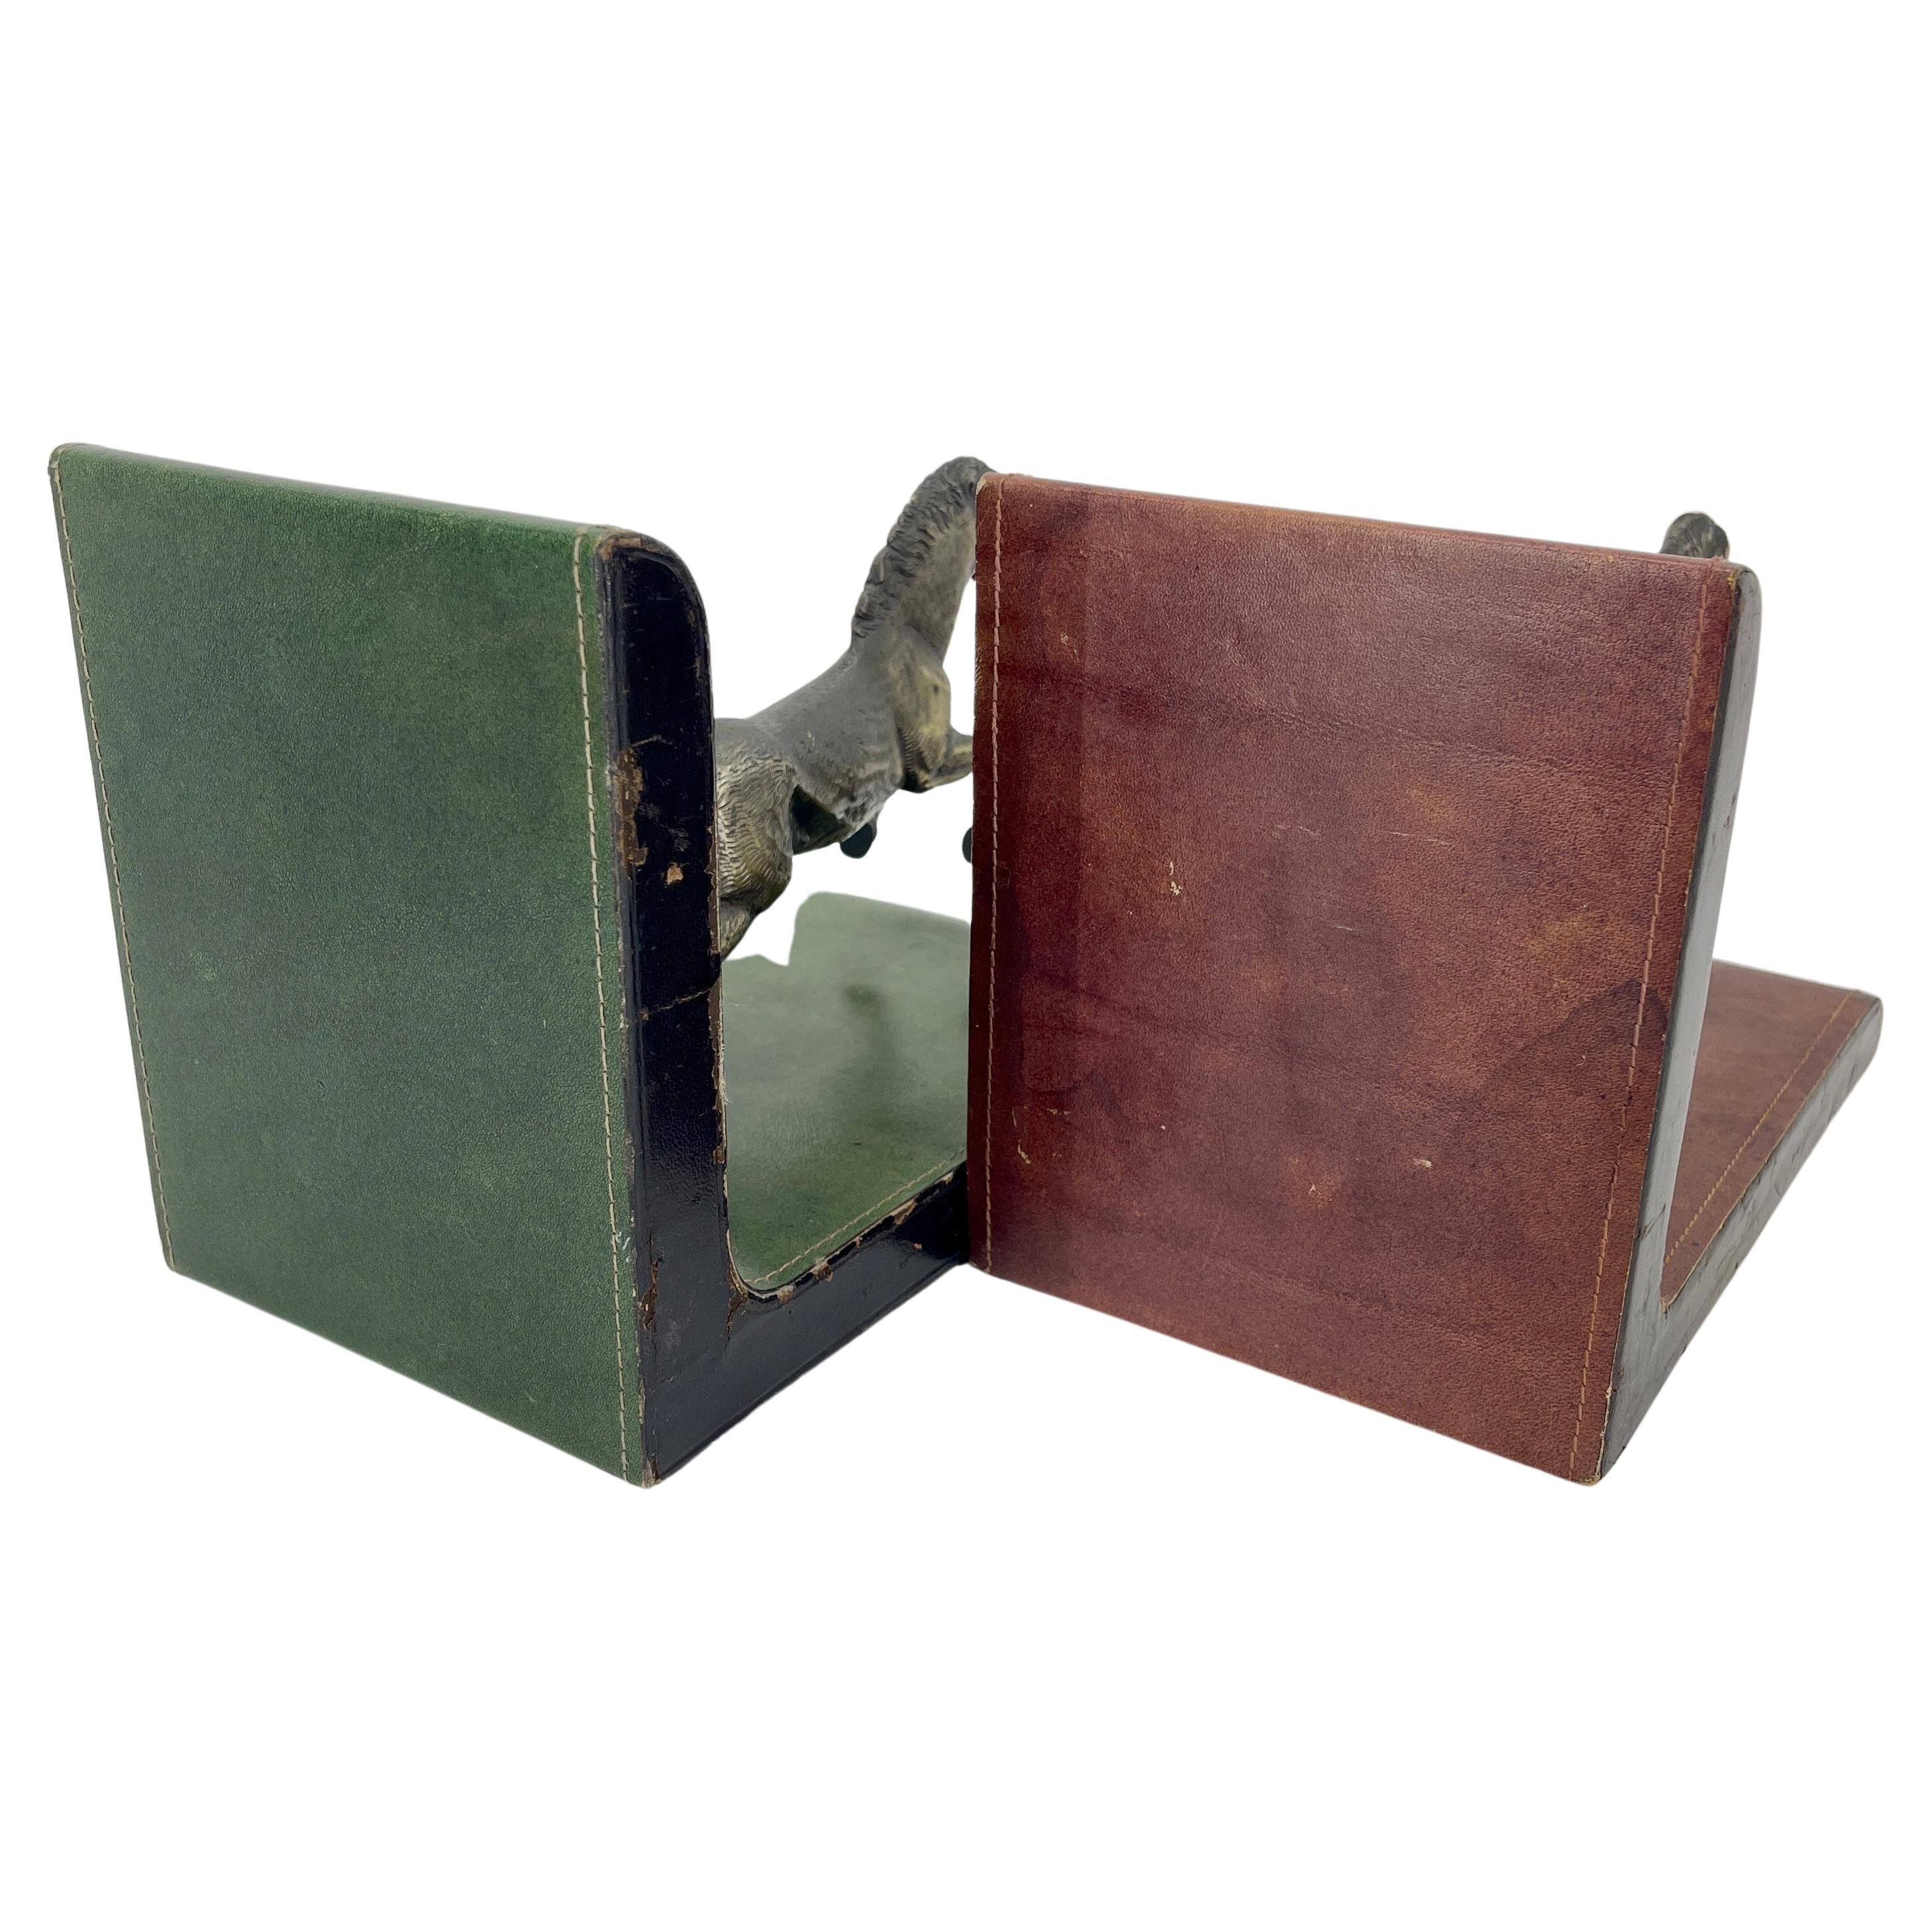 Pair of Italian Red and Green Leather Equestrian Bookends, circa 1950s For Sale 9